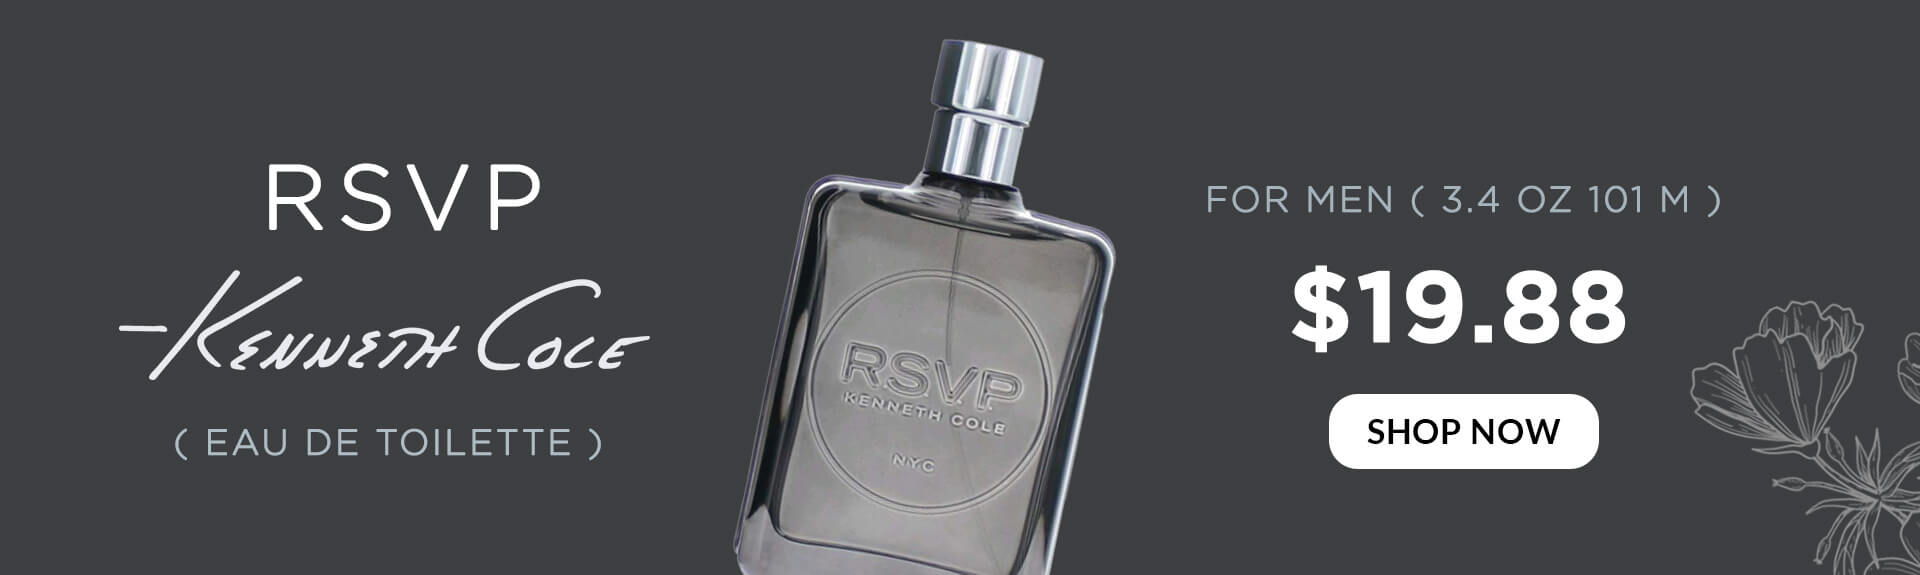 RSVP by Kenneth Cole for Men